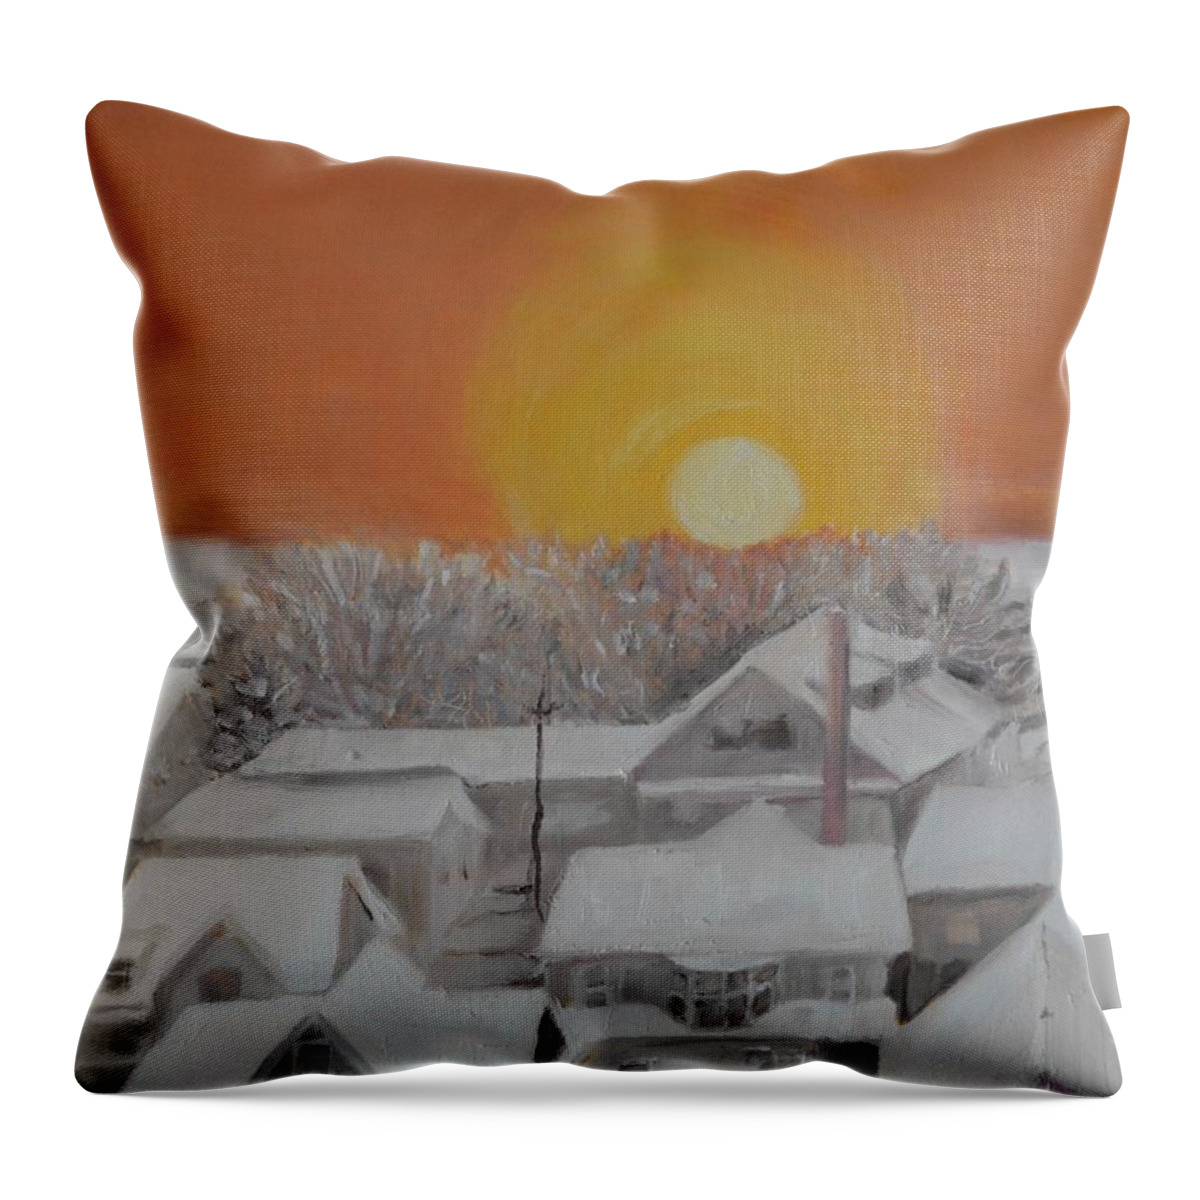 Snow Throw Pillow featuring the painting Winter Sunrise by Julie Todd-Cundiff